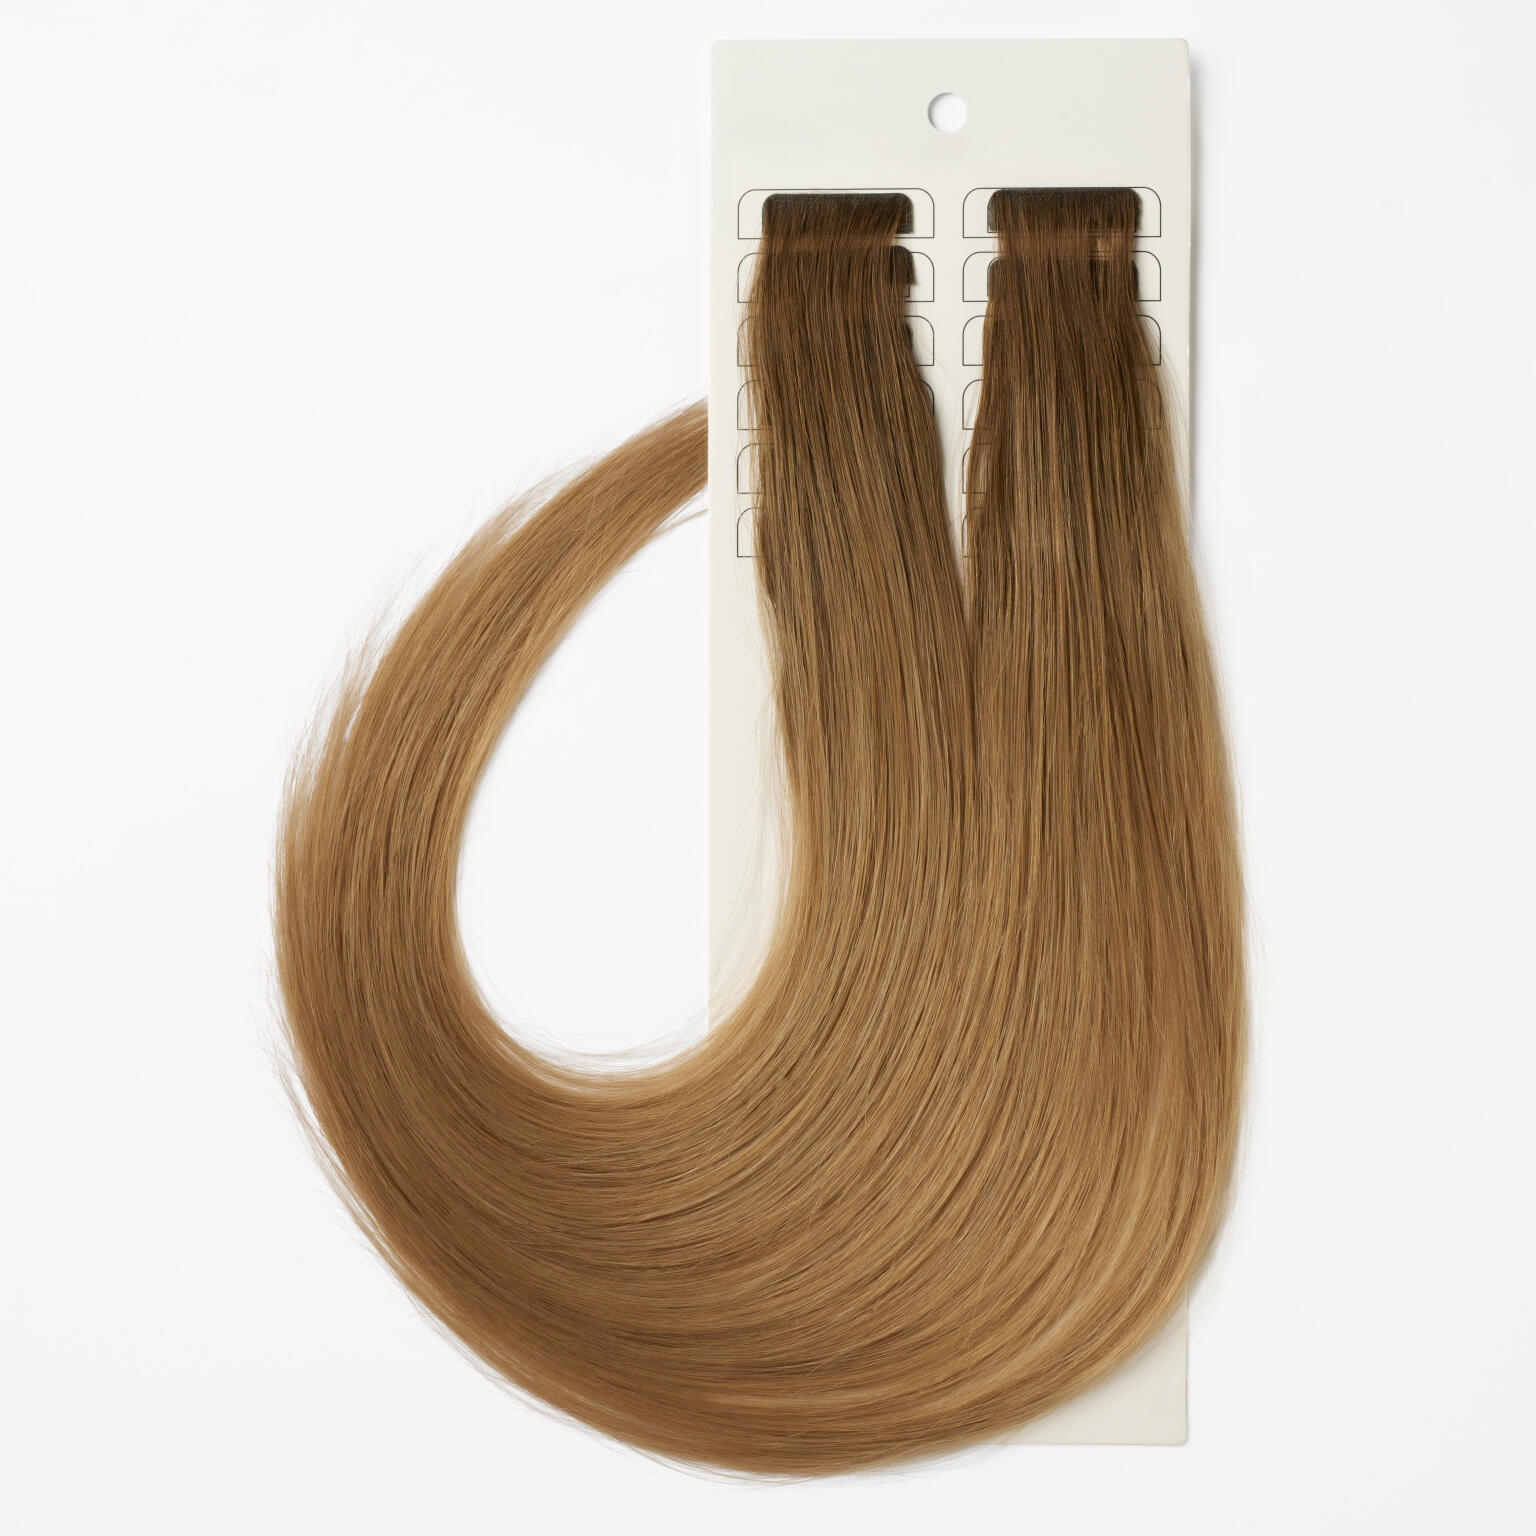 Luxe Tape Extensions Seamless 3 CM6.3/9.93 30 cm